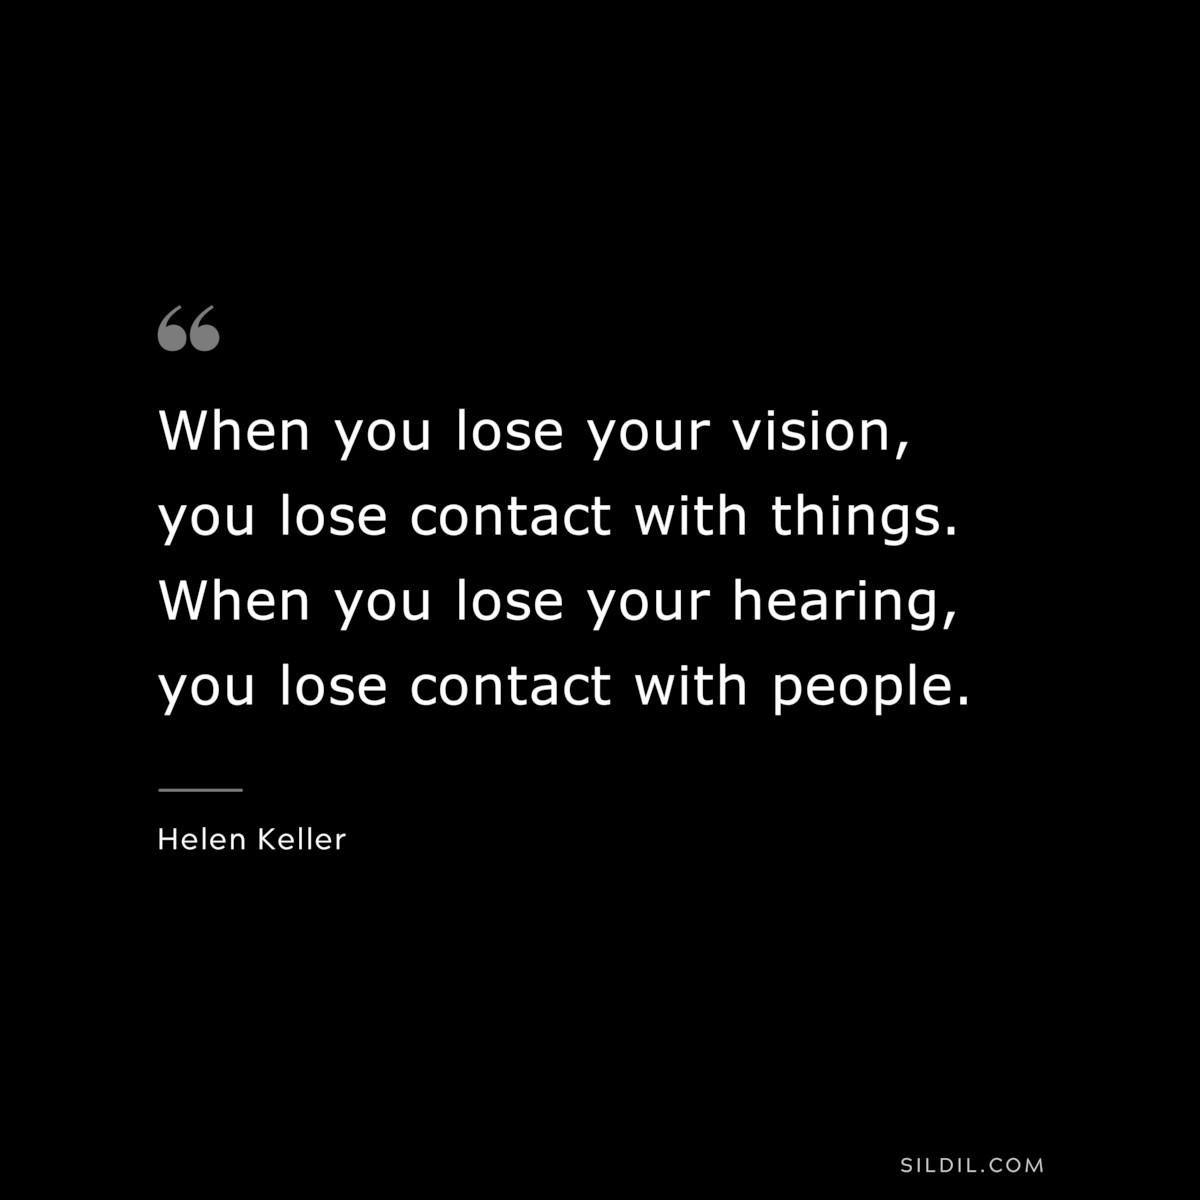 When you lose your vision, you lose contact with things. When you lose your hearing, you lose contact with people. ― Helen Keller